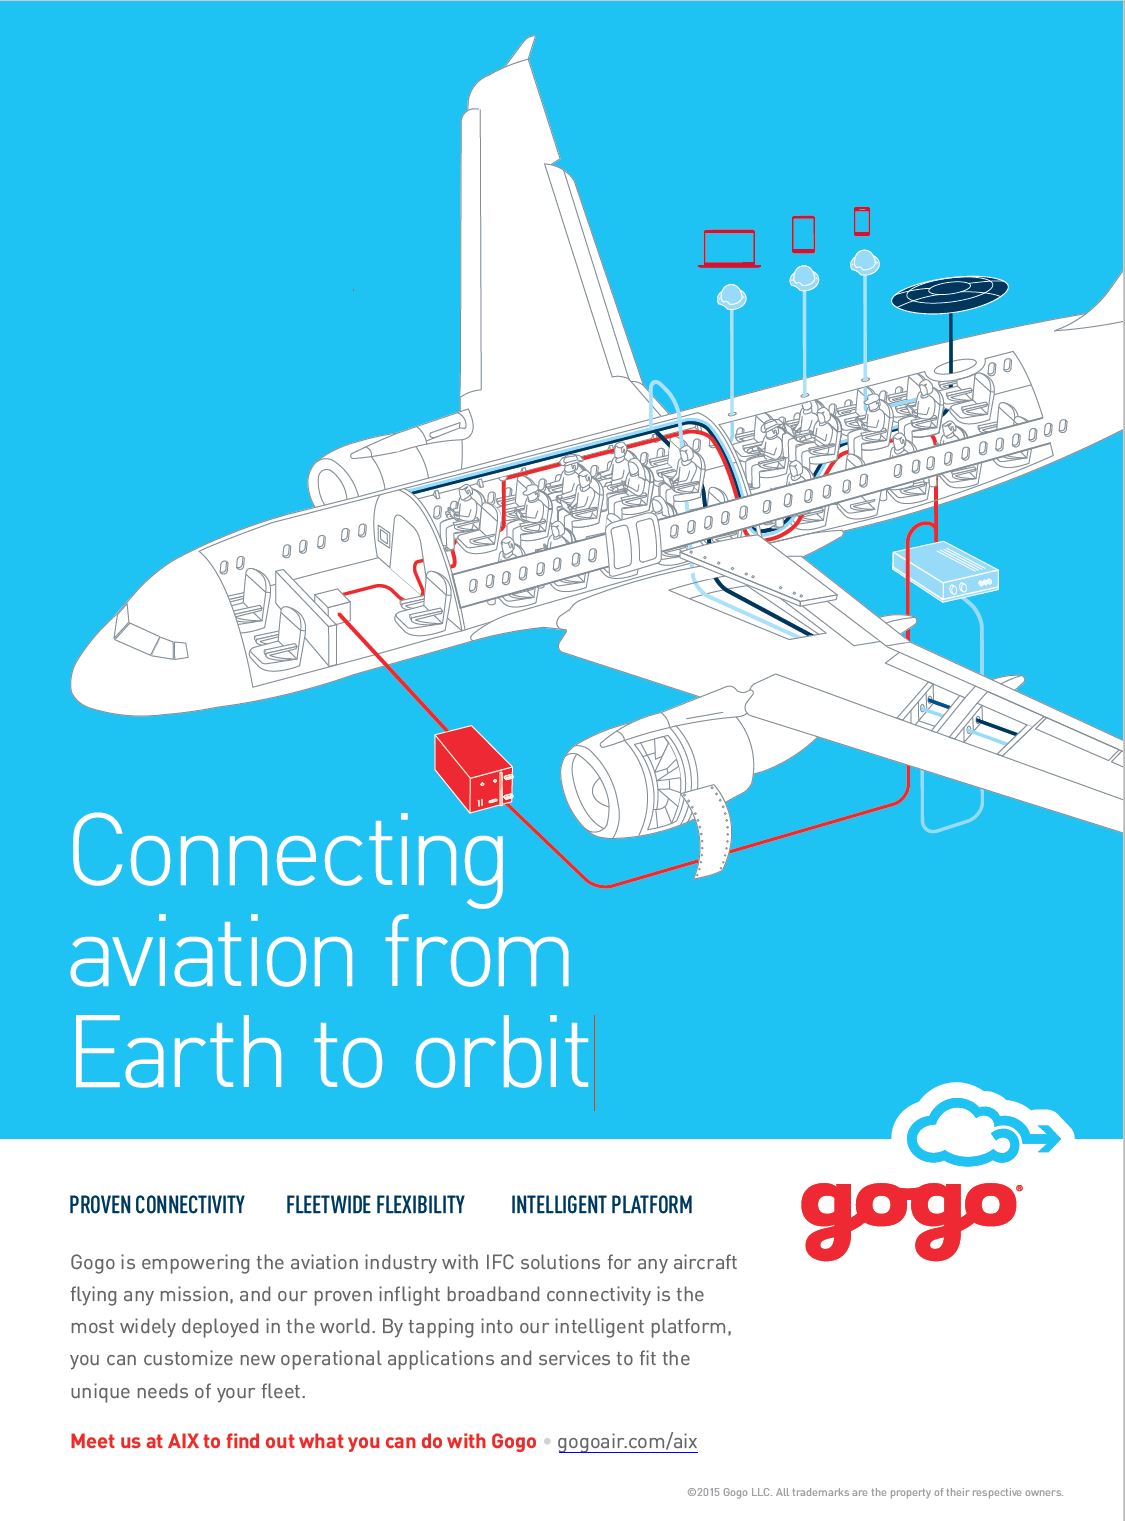 gogo: Connecting aviation from earth to orbit